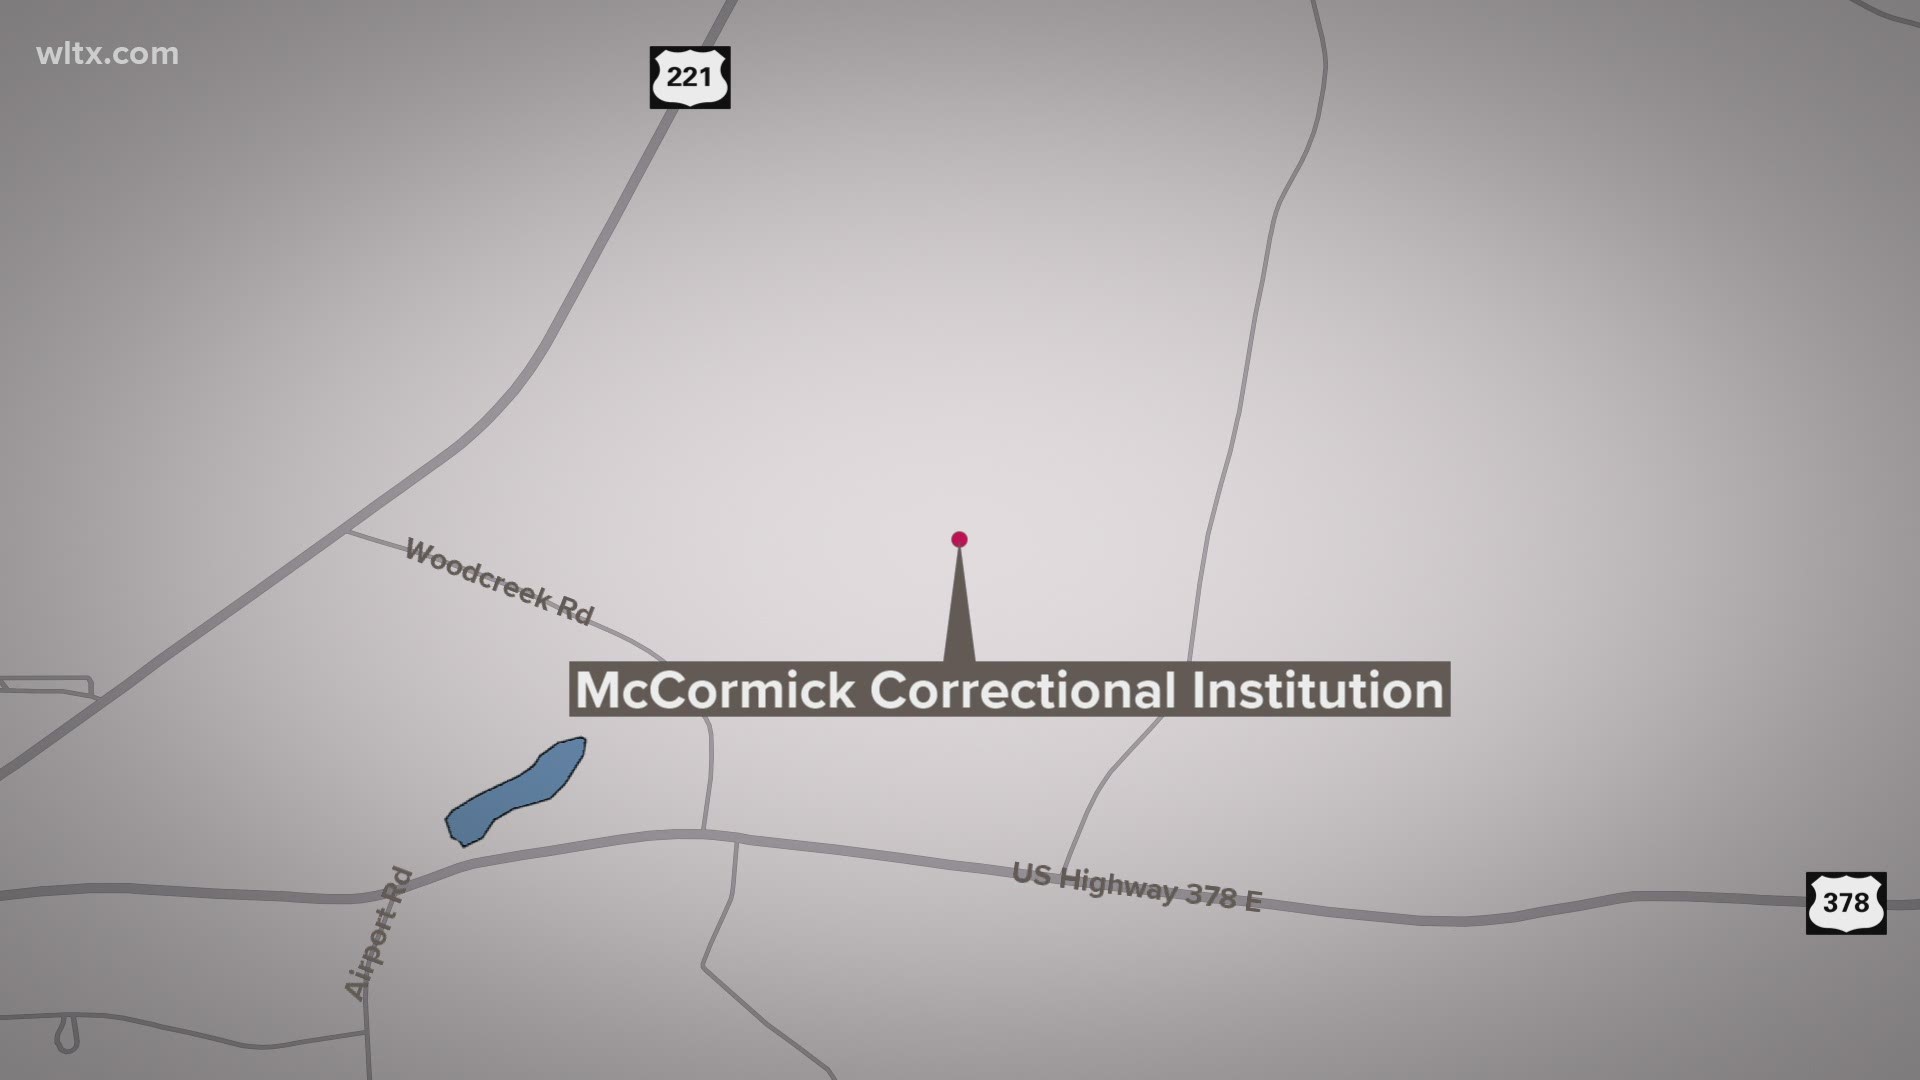 An officer was locked in a cell by inmates at a South Carolina prison Sunday night in an escape attempt. Officials say the incident is now over.